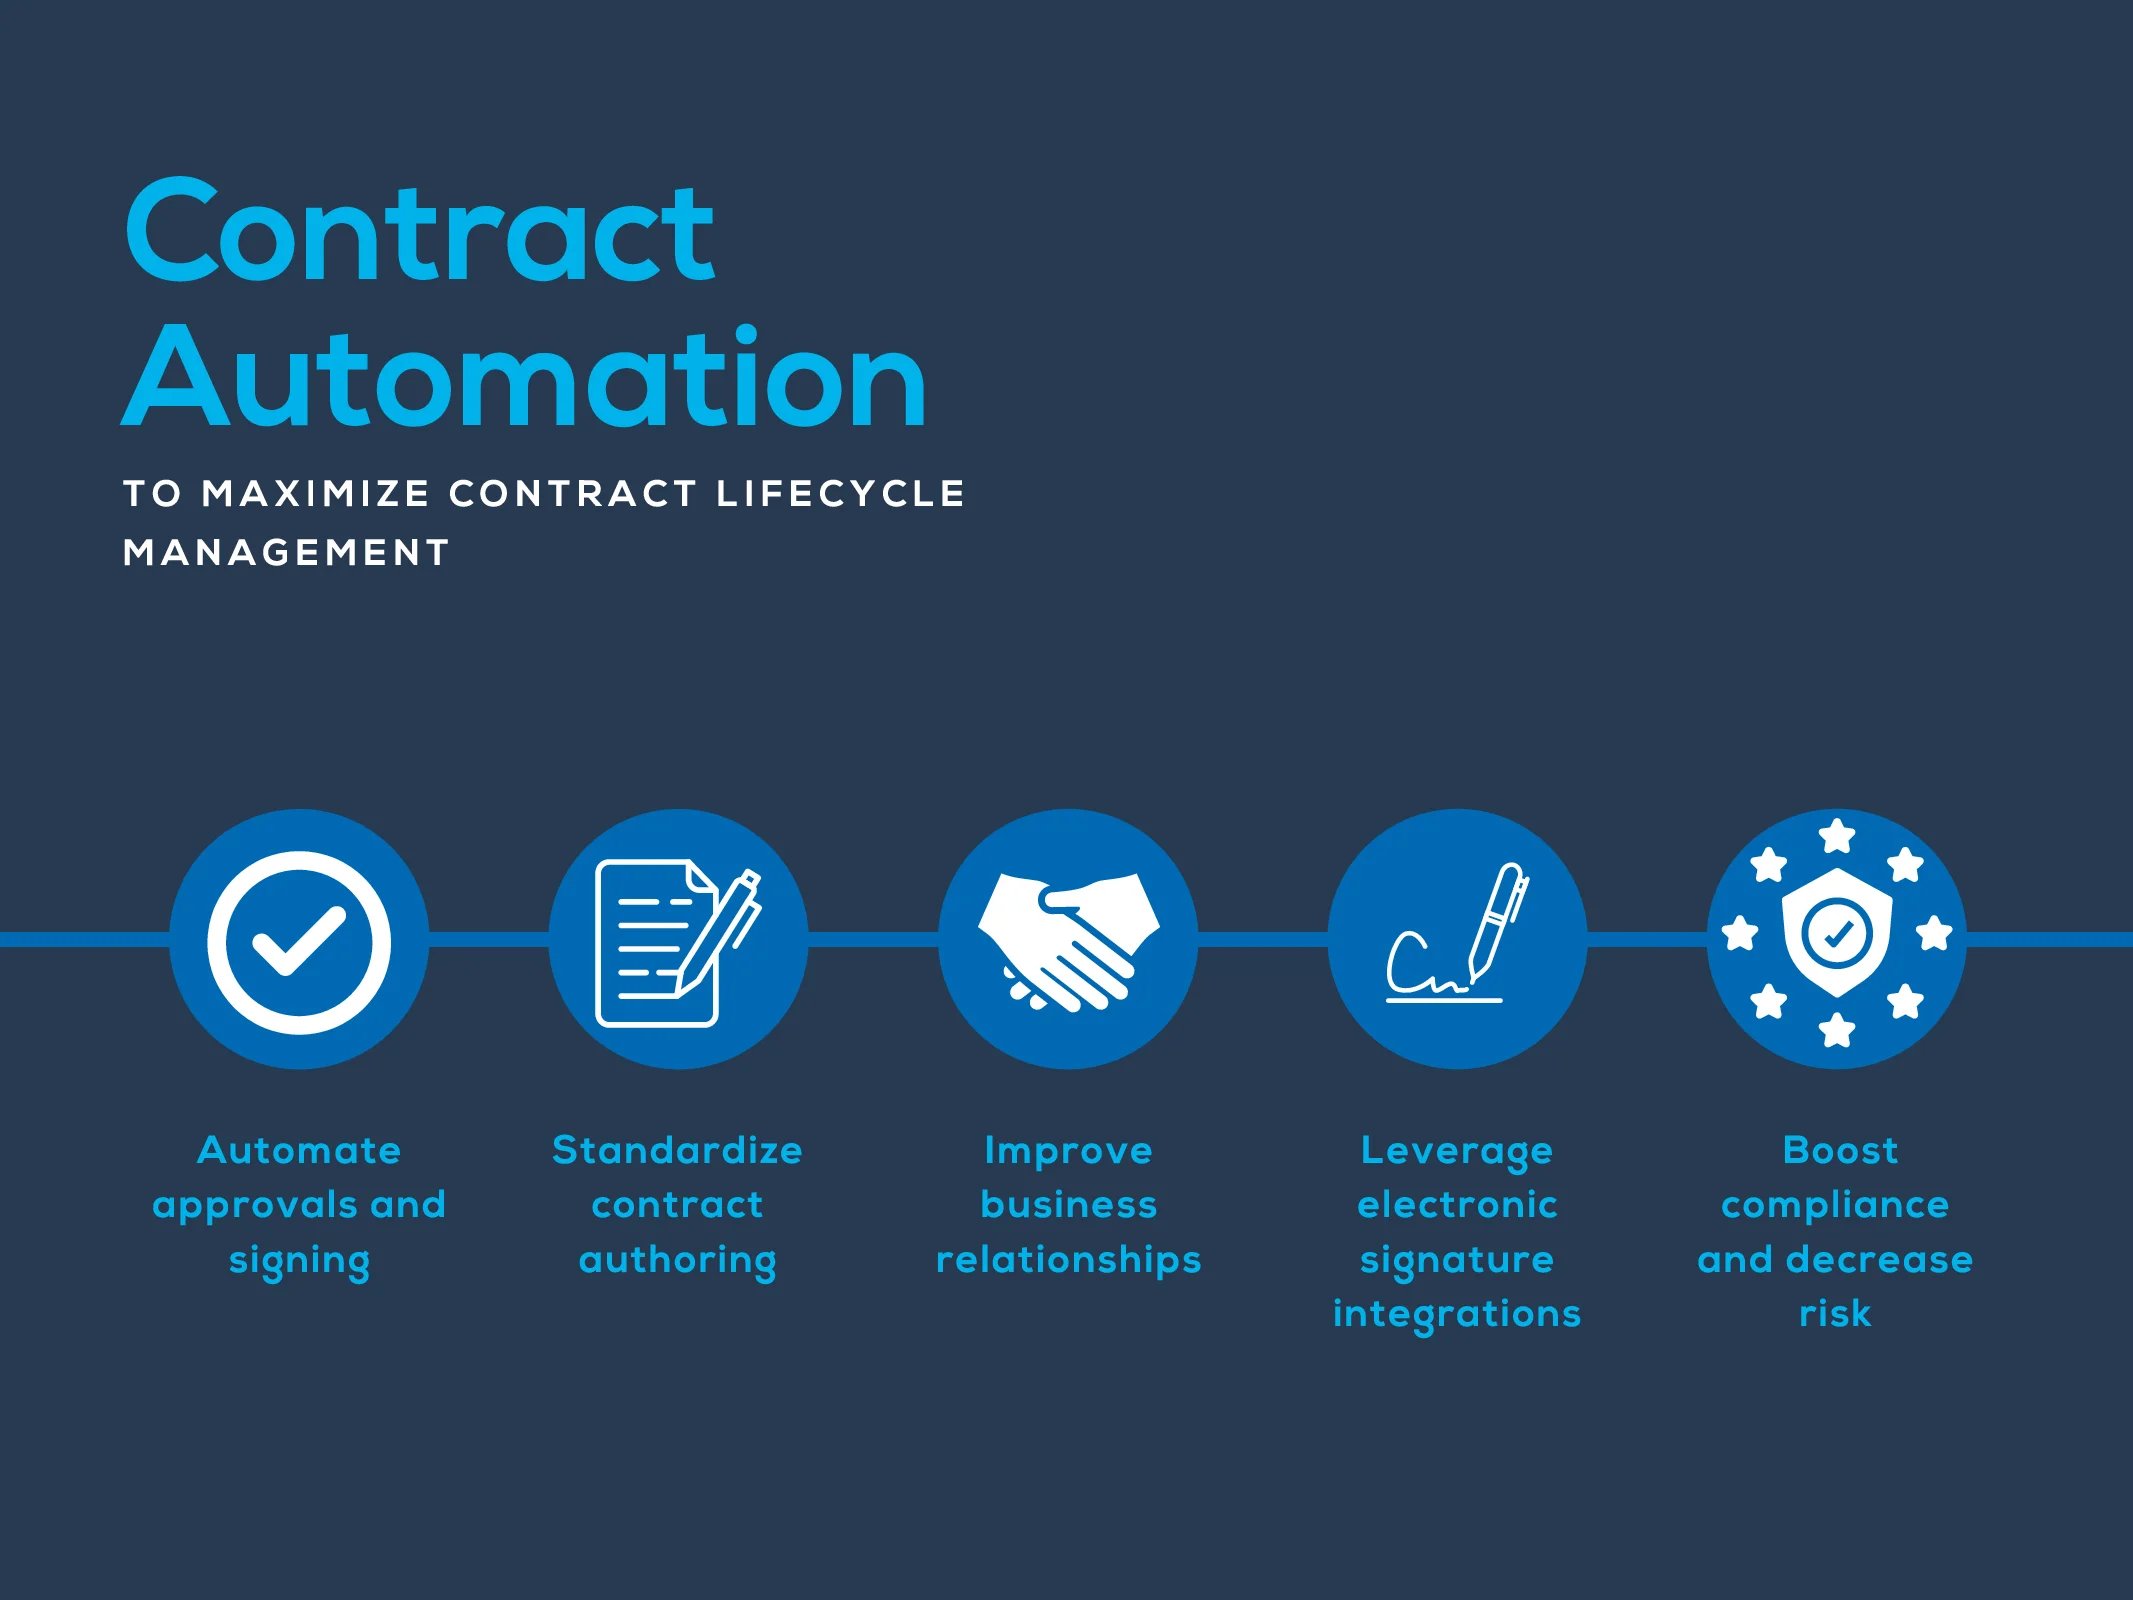 Contract Automation to Maximize Contract Lifecycle Management